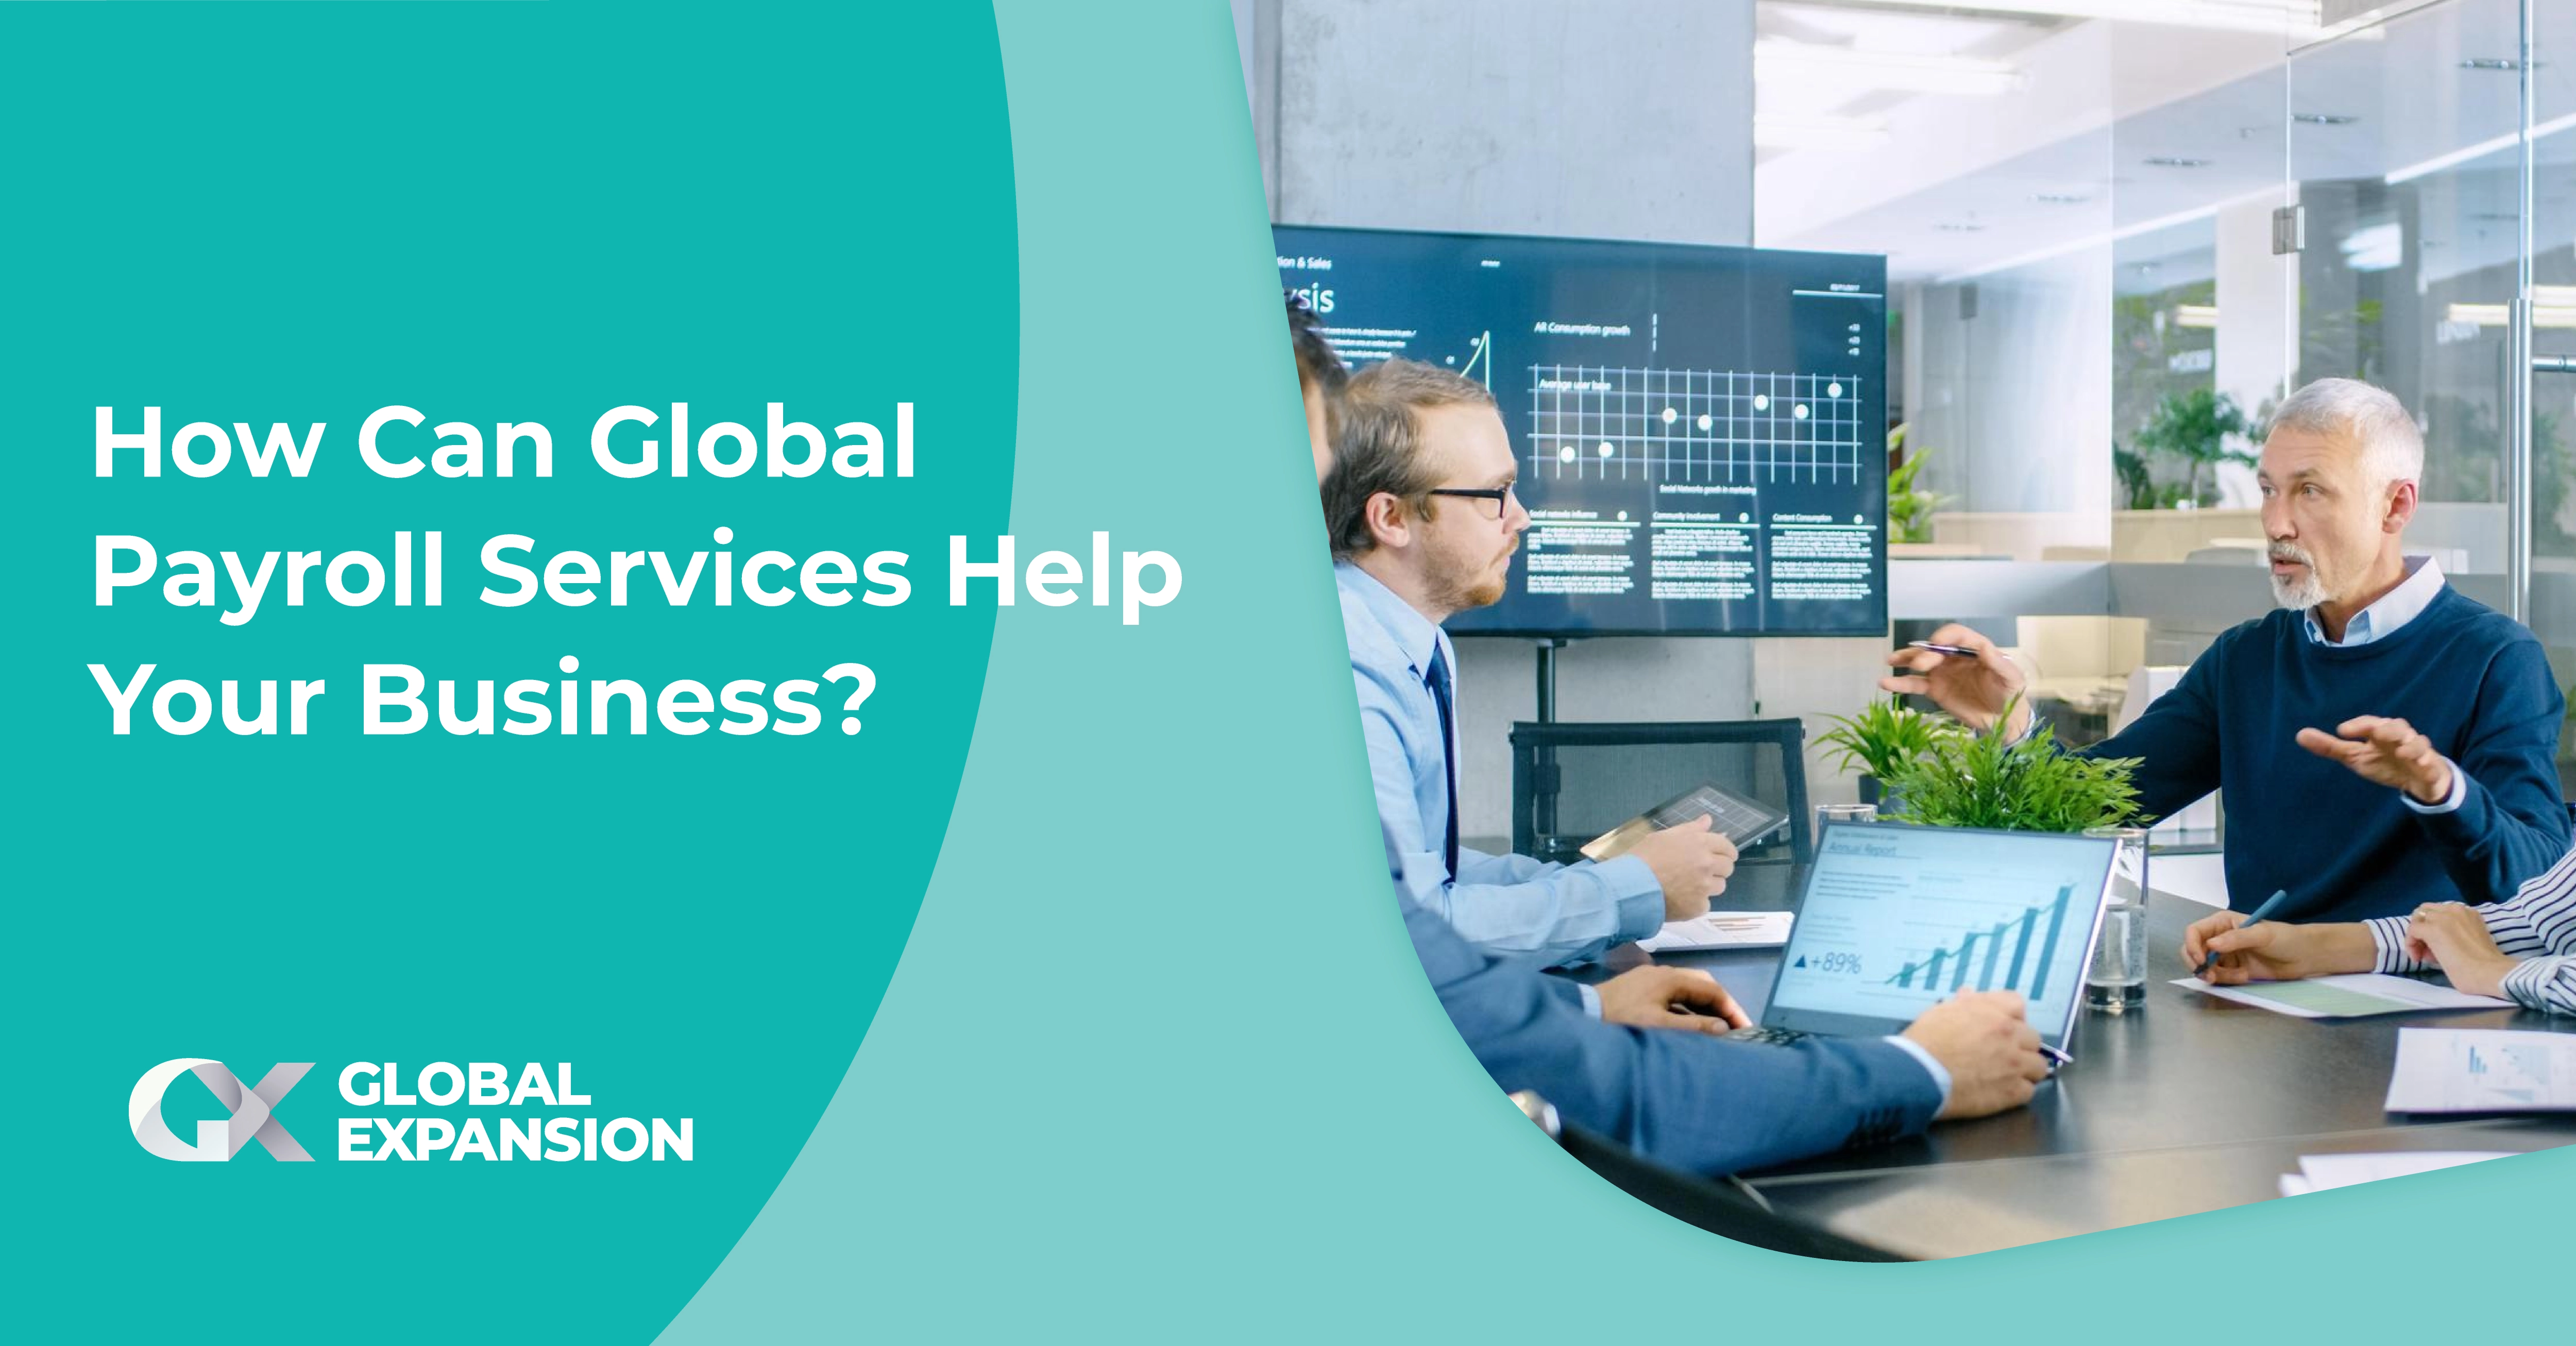 How Can Global Payroll Services Help Your Business?